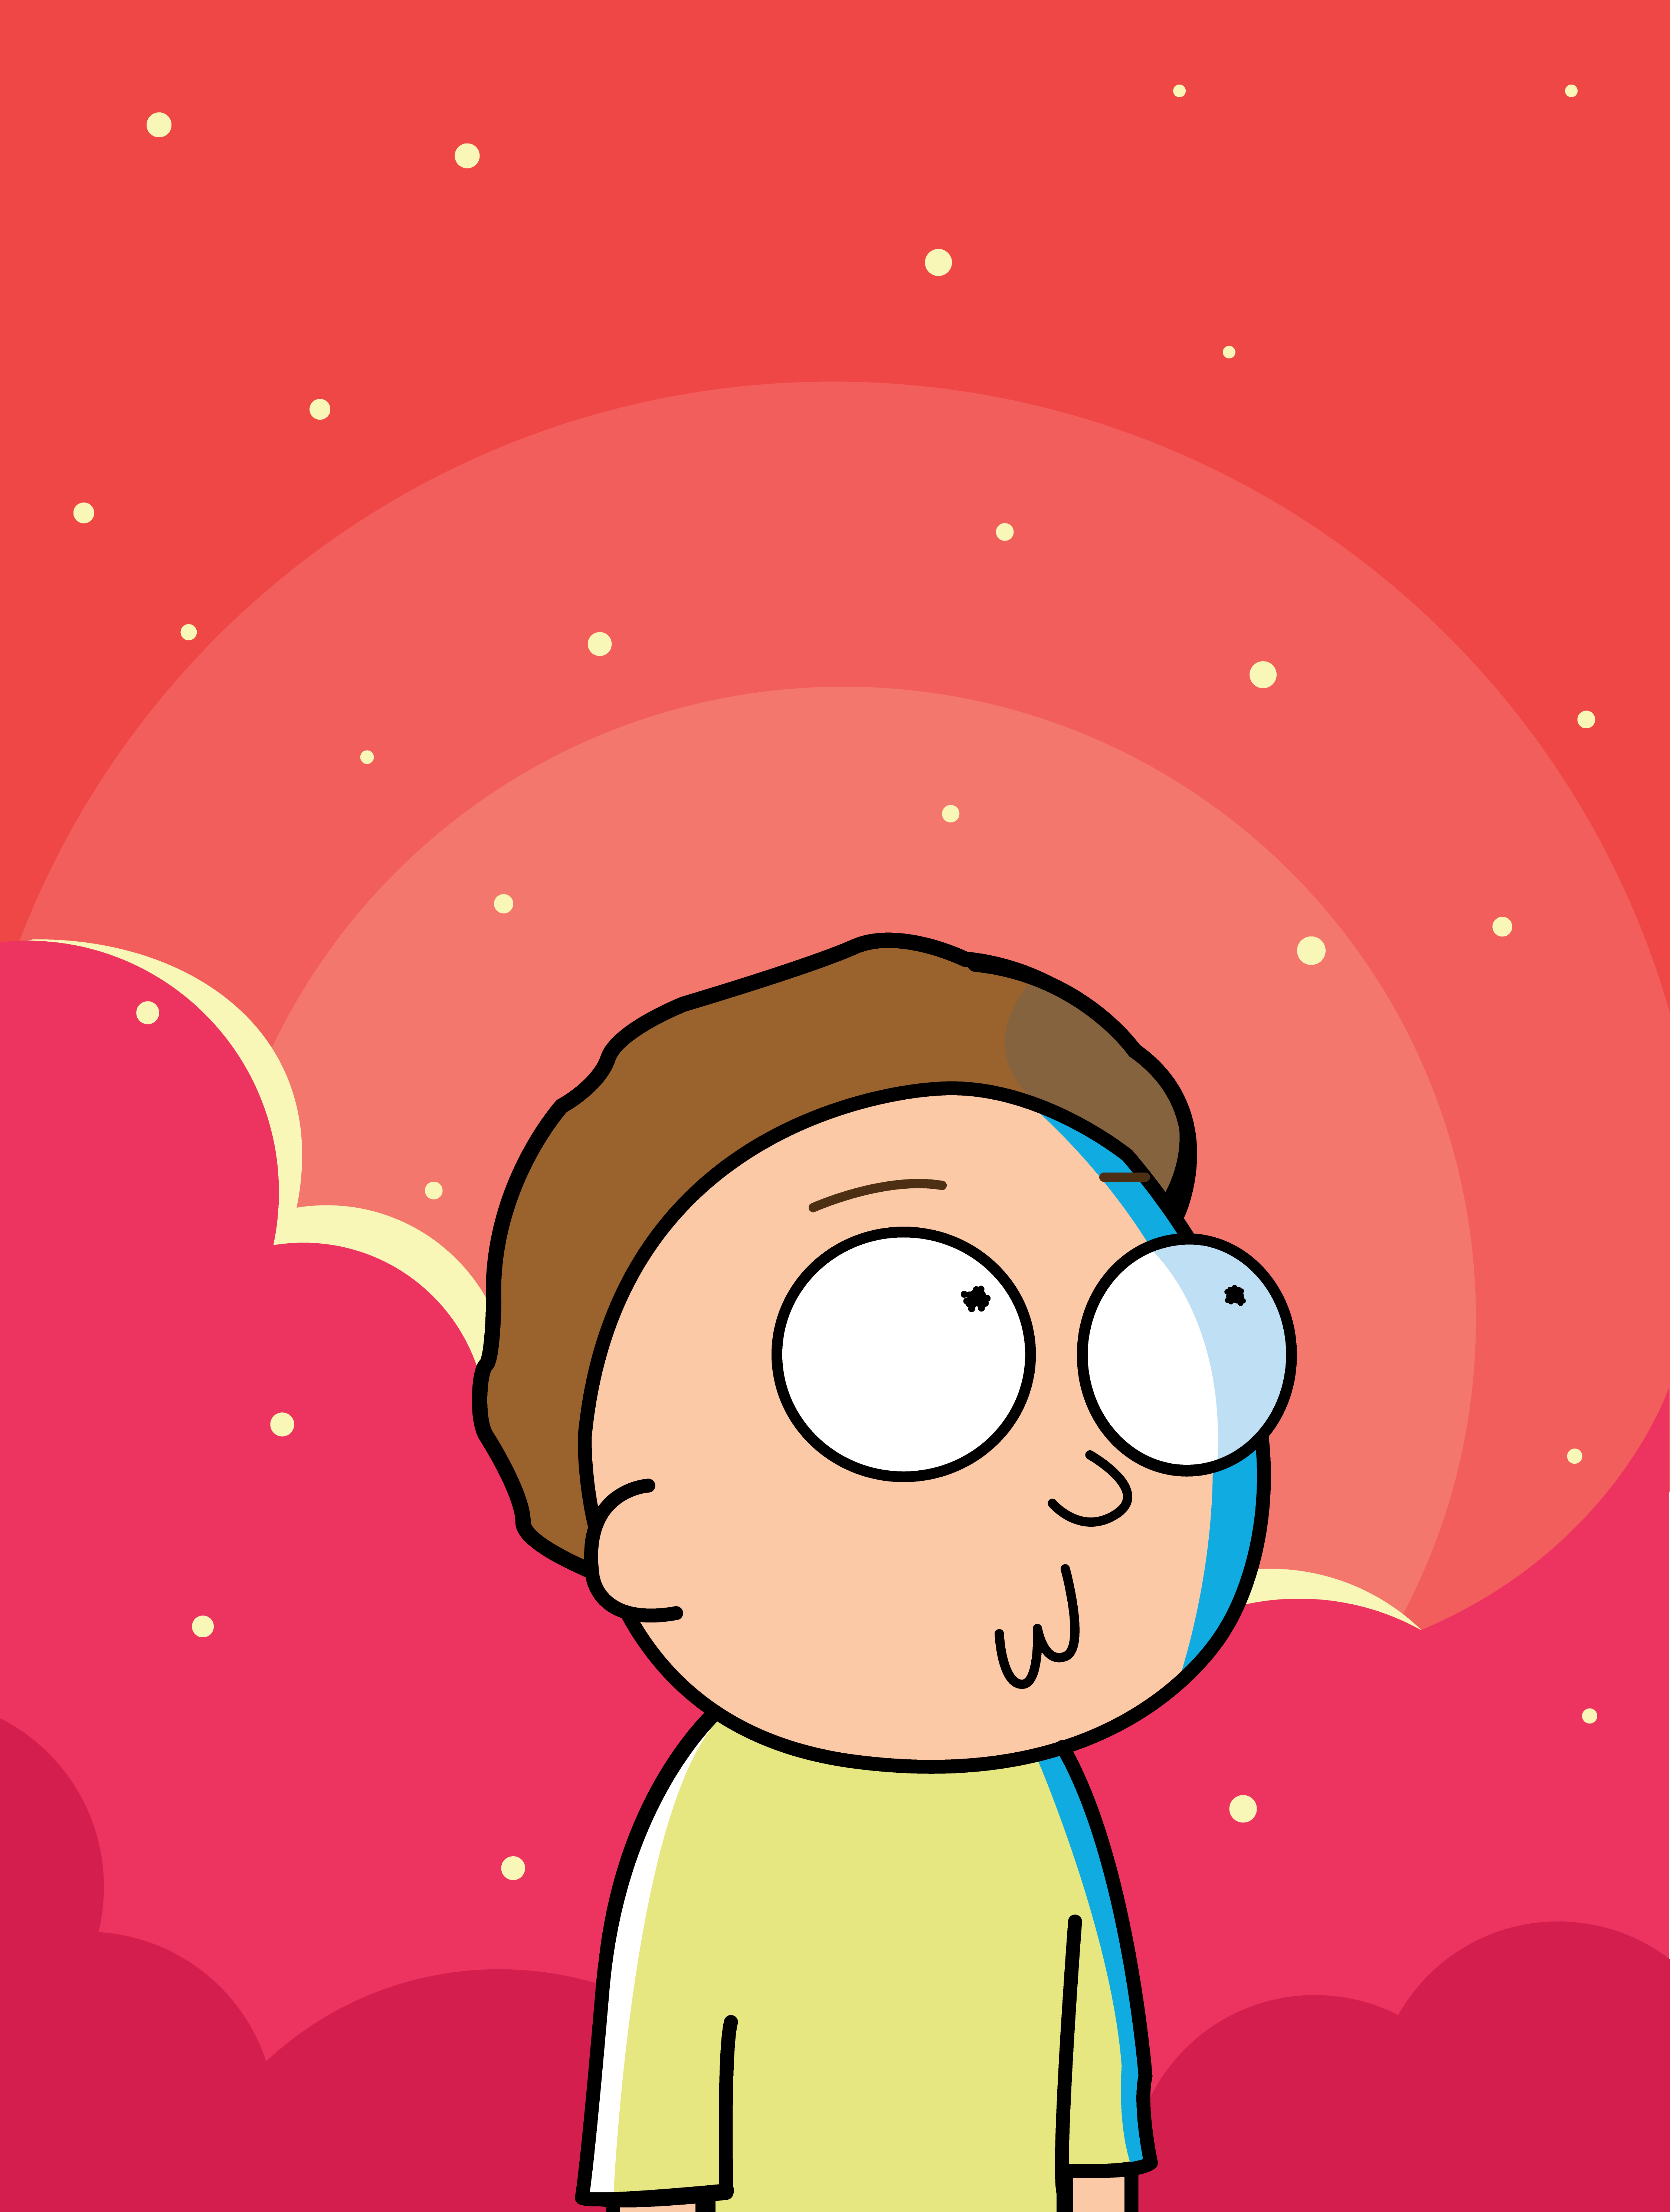 Coloring Morty (phone wallpaper size)